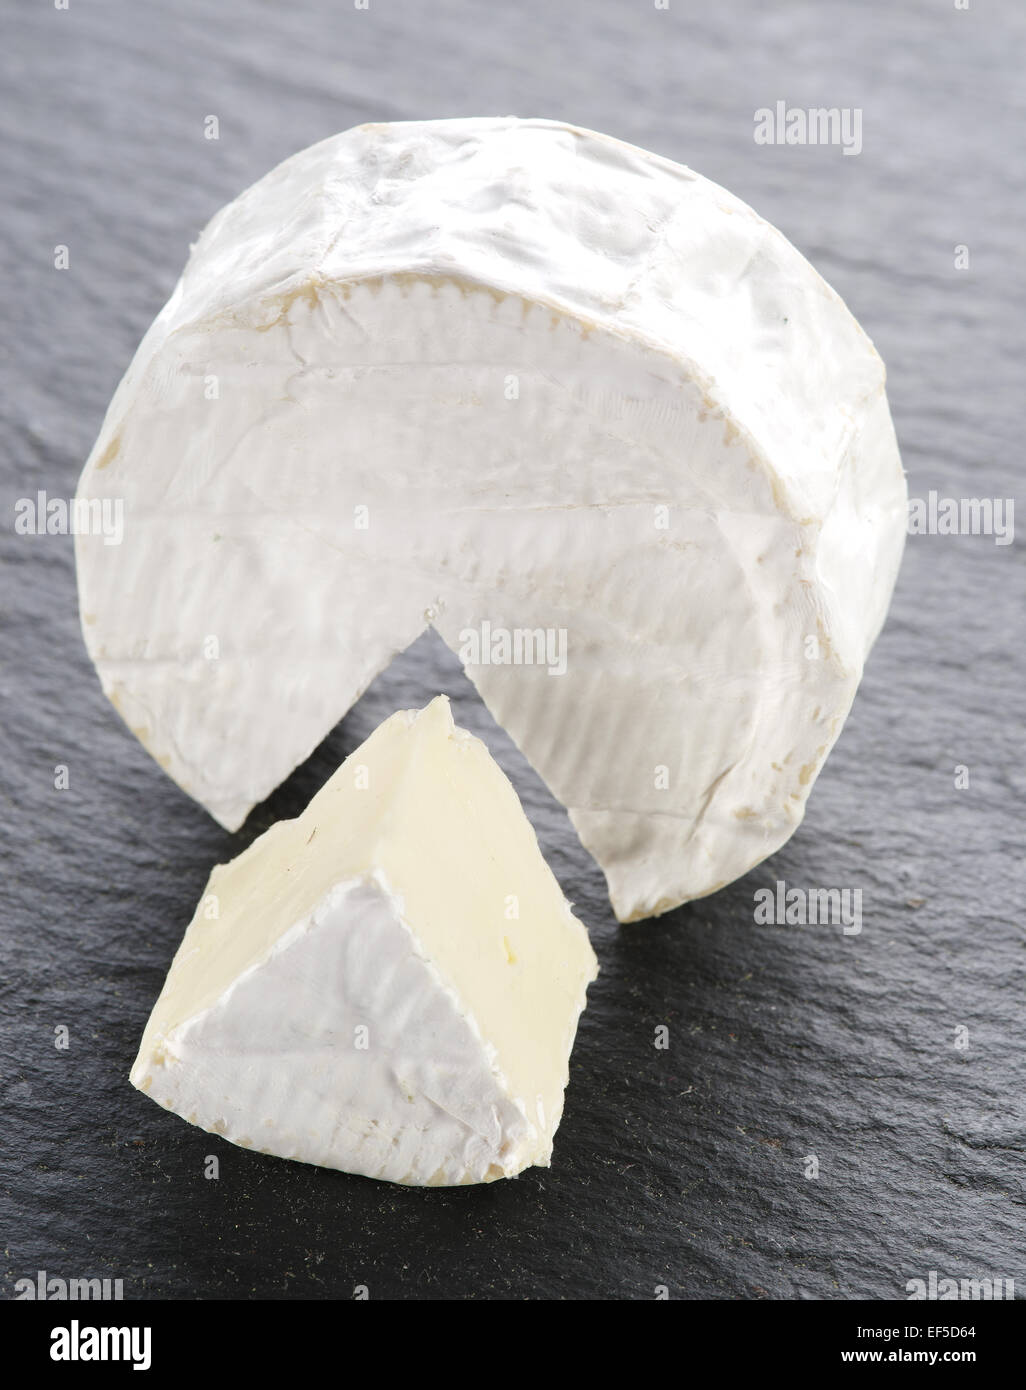 Camembert cheese on the gray stone surface. Stock Photo